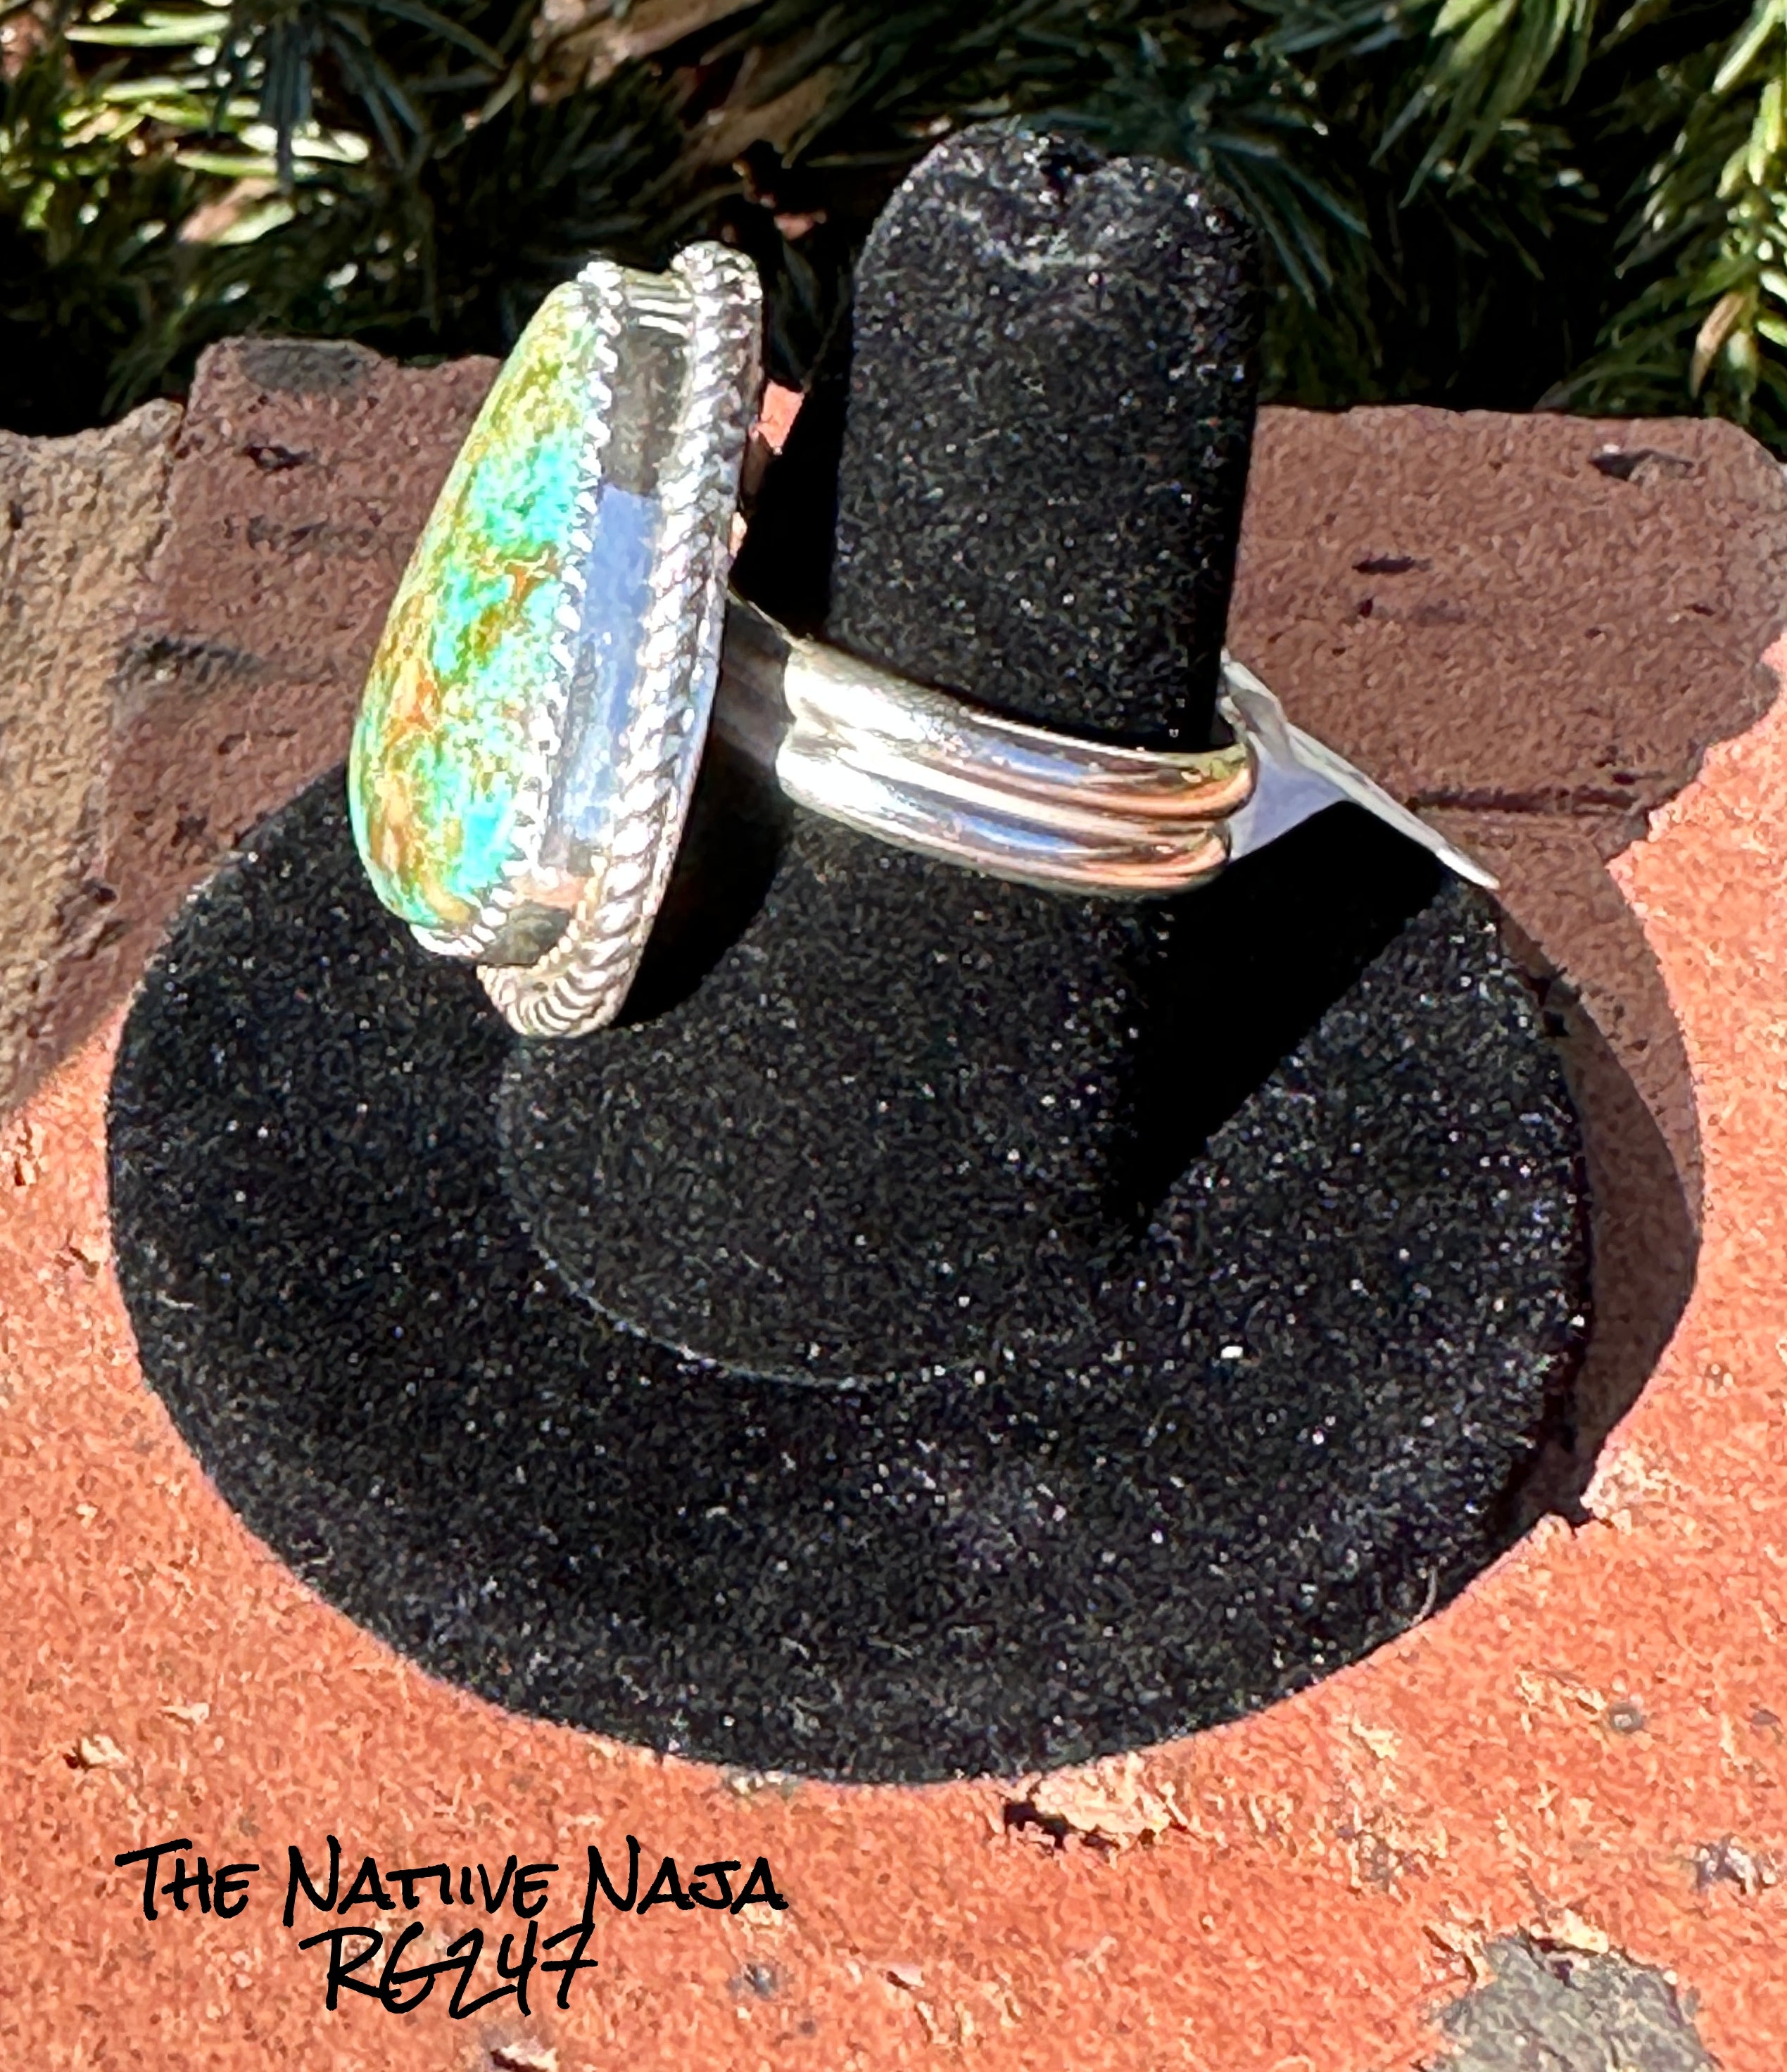 Navajo Benny Benally Sterling Silver & Royston Turquoise Adjustable Ring RG247